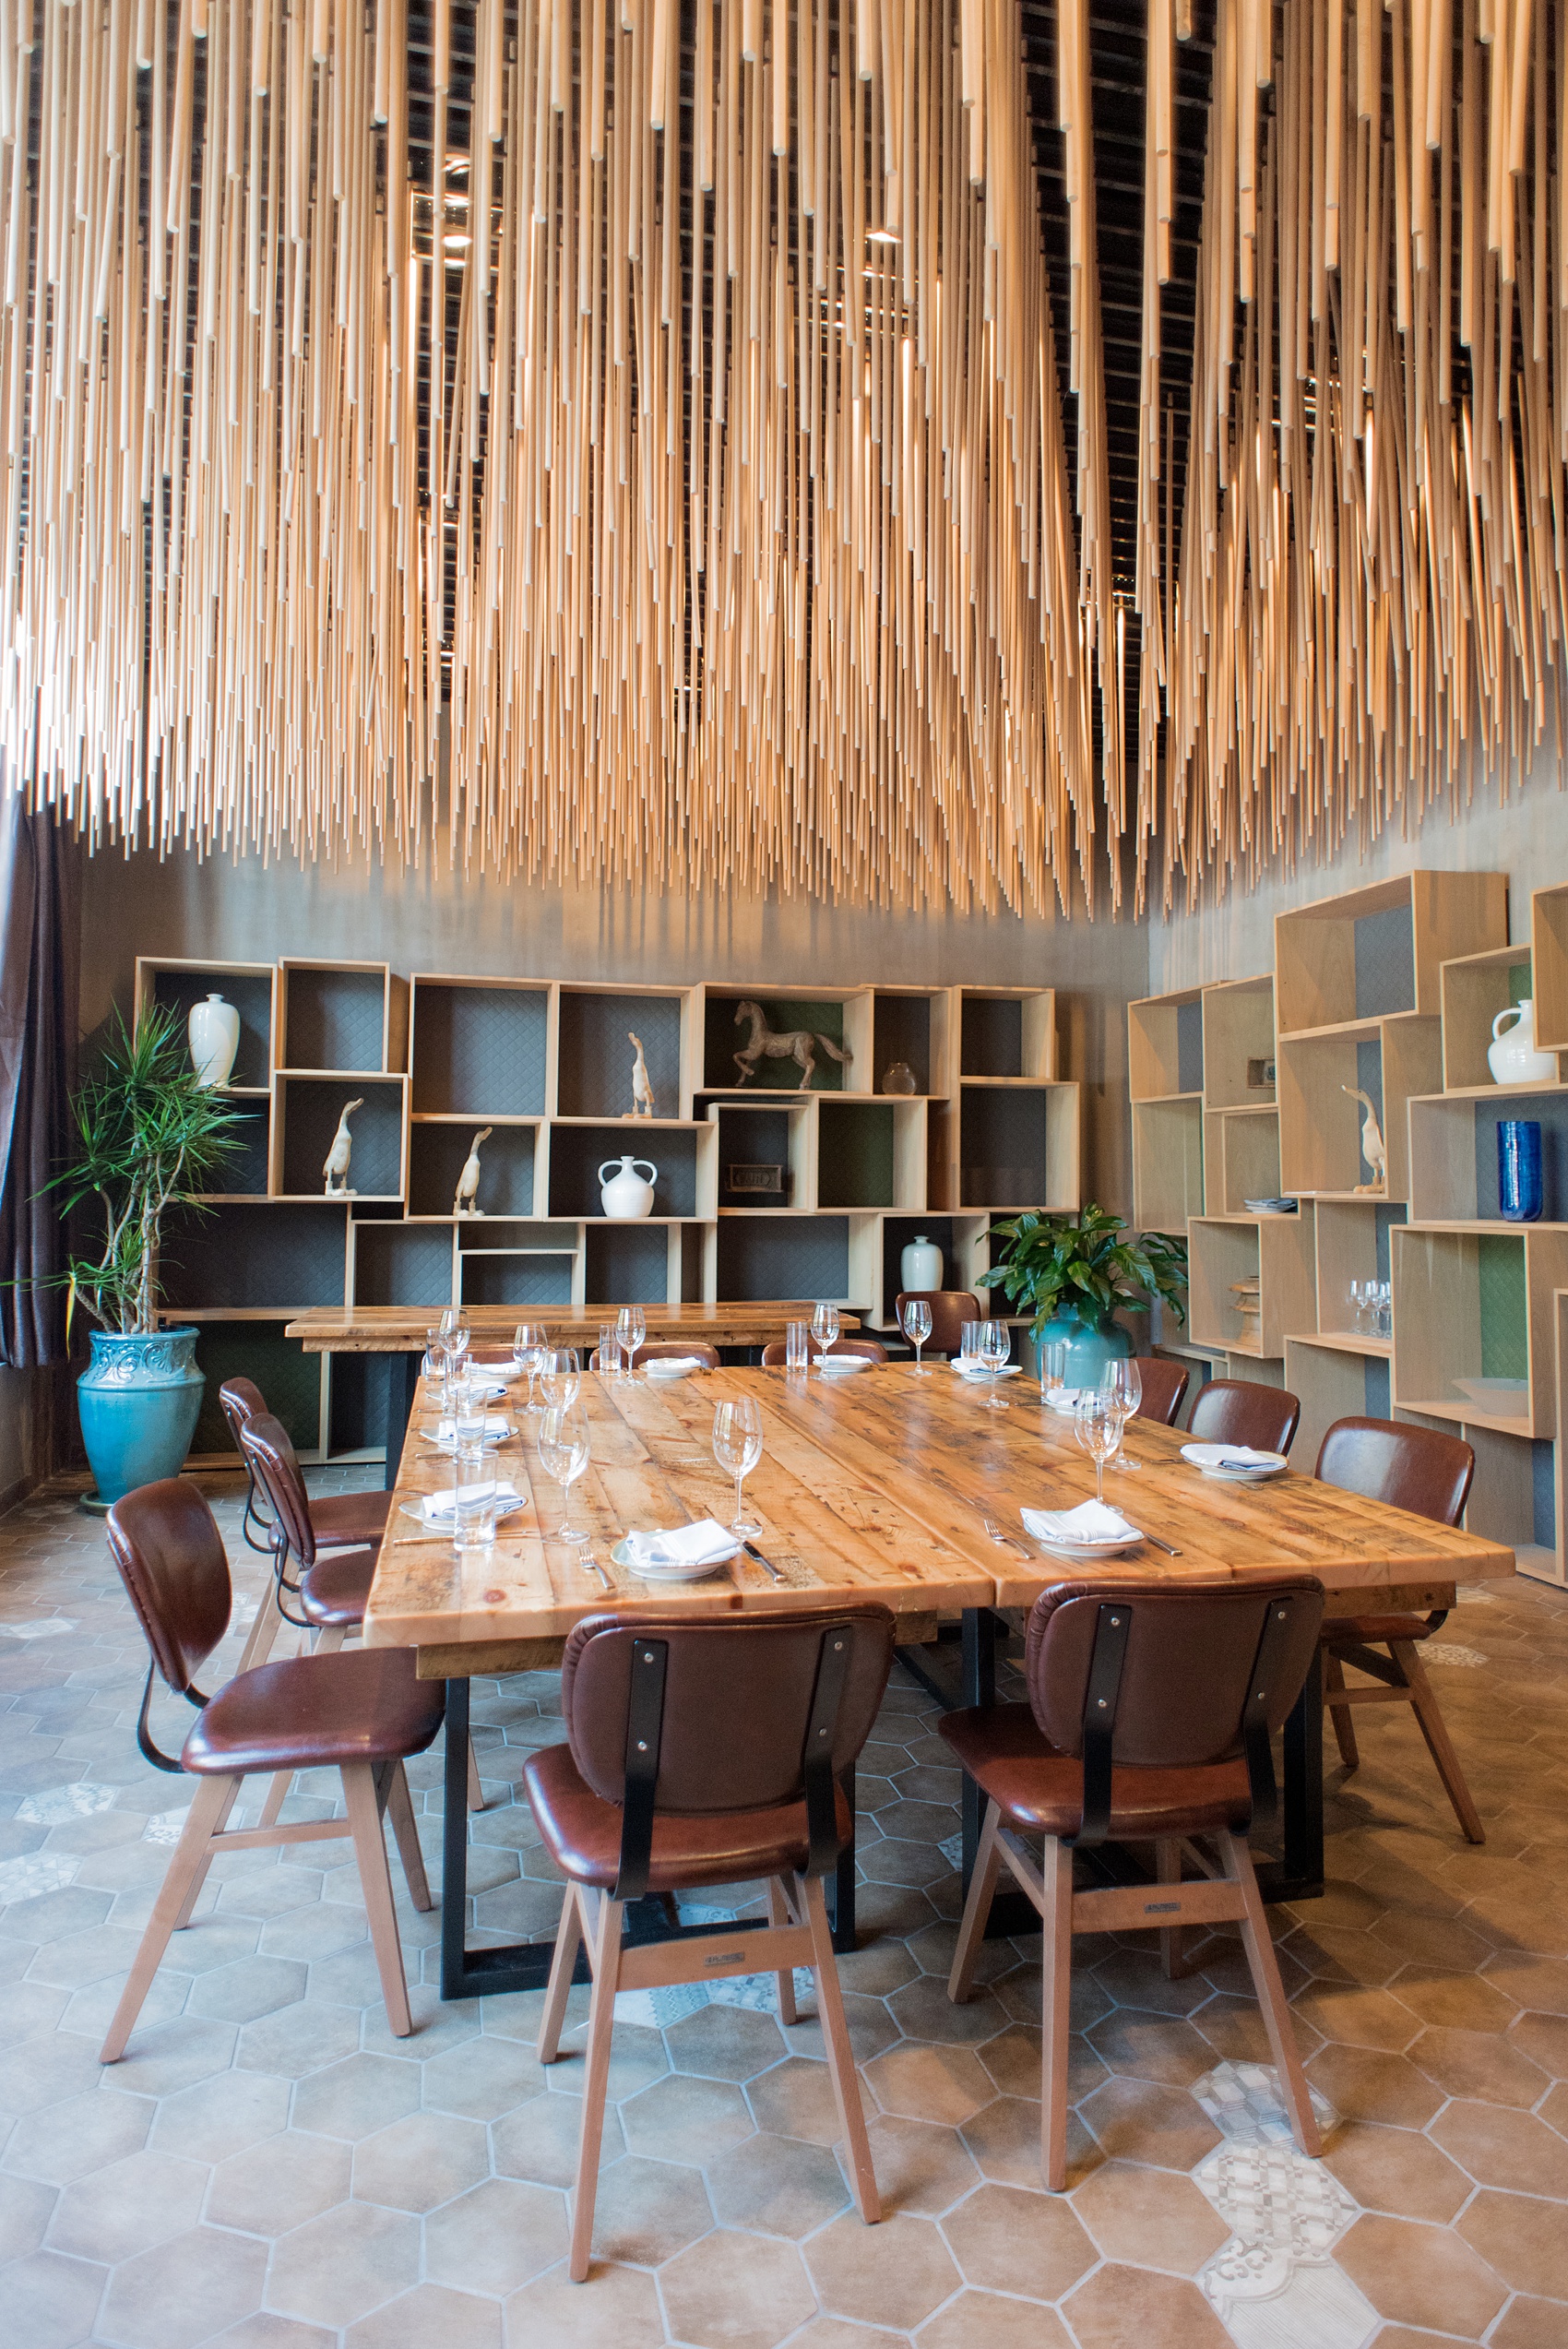 Photos of Vidrio restaurant in Raleigh, NC by Mikkel Paige Photography. Wedding venue in North Carolina with mediterranean and Spanish inspired art and interior design.